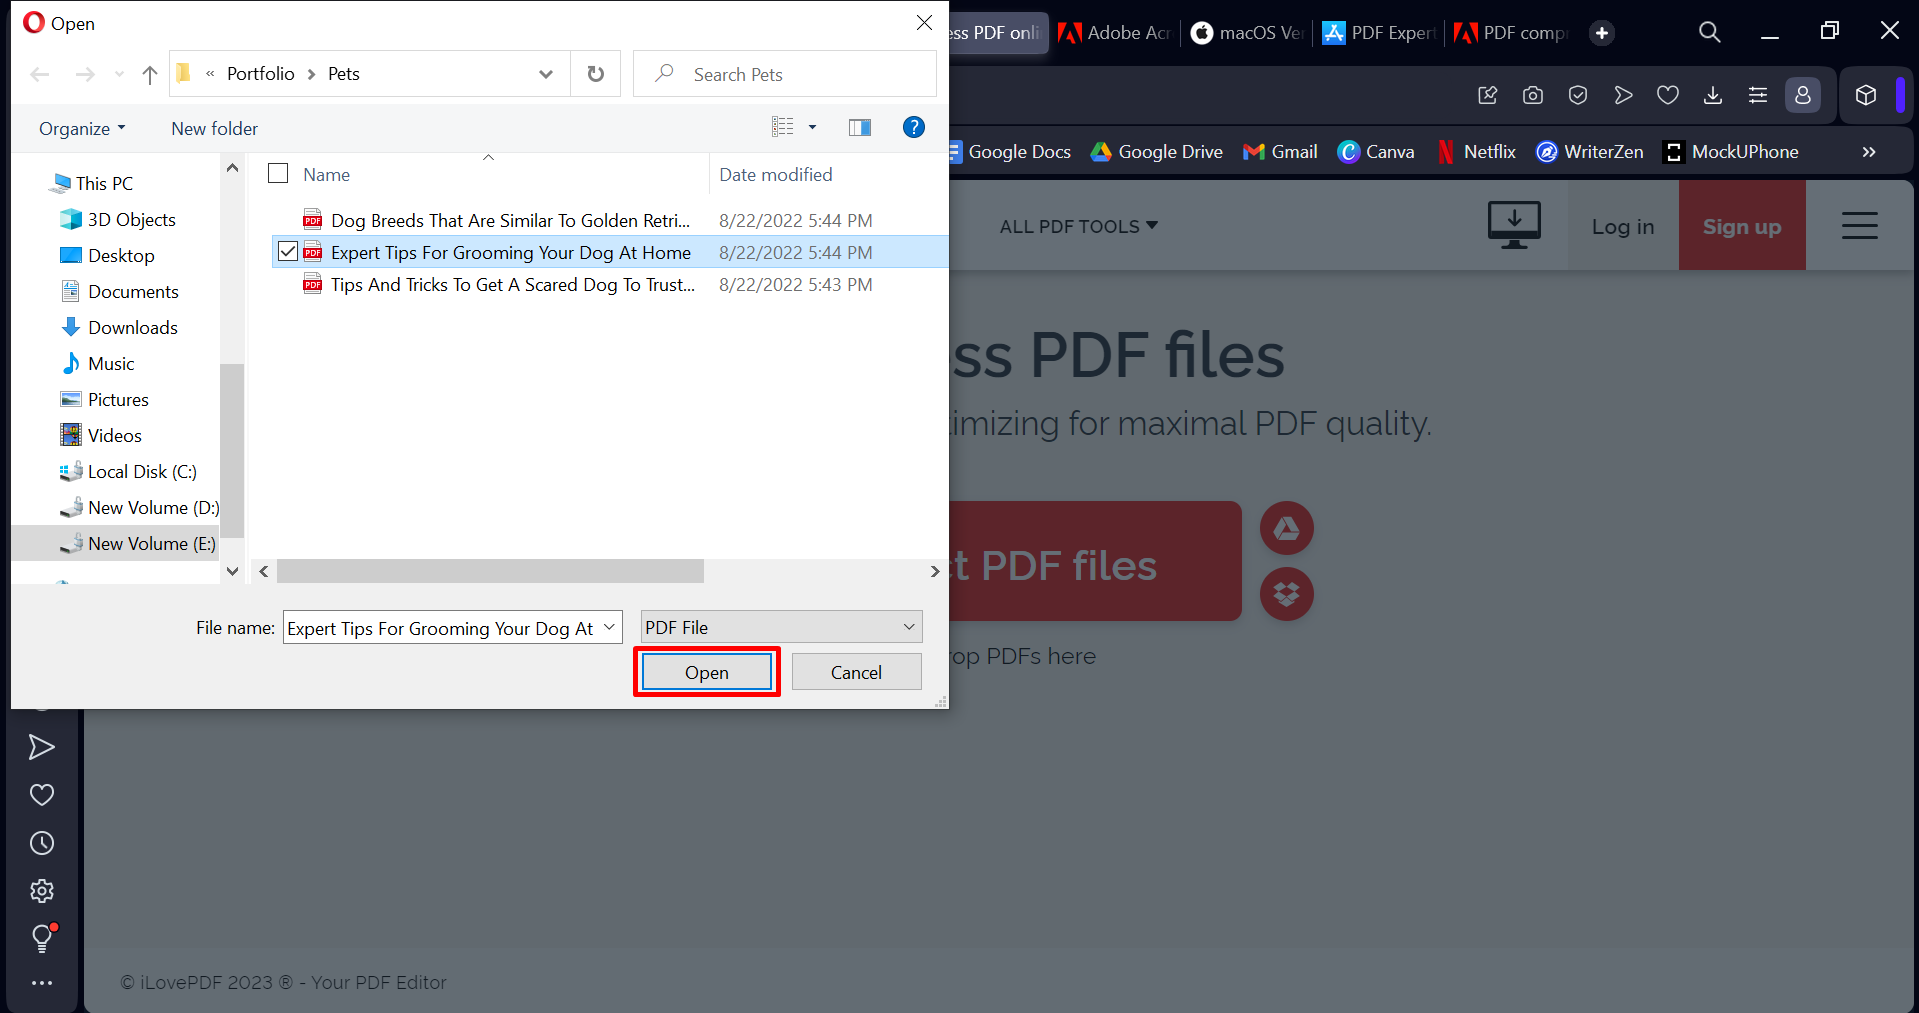 Select the PDF you want to inspect and press Open.